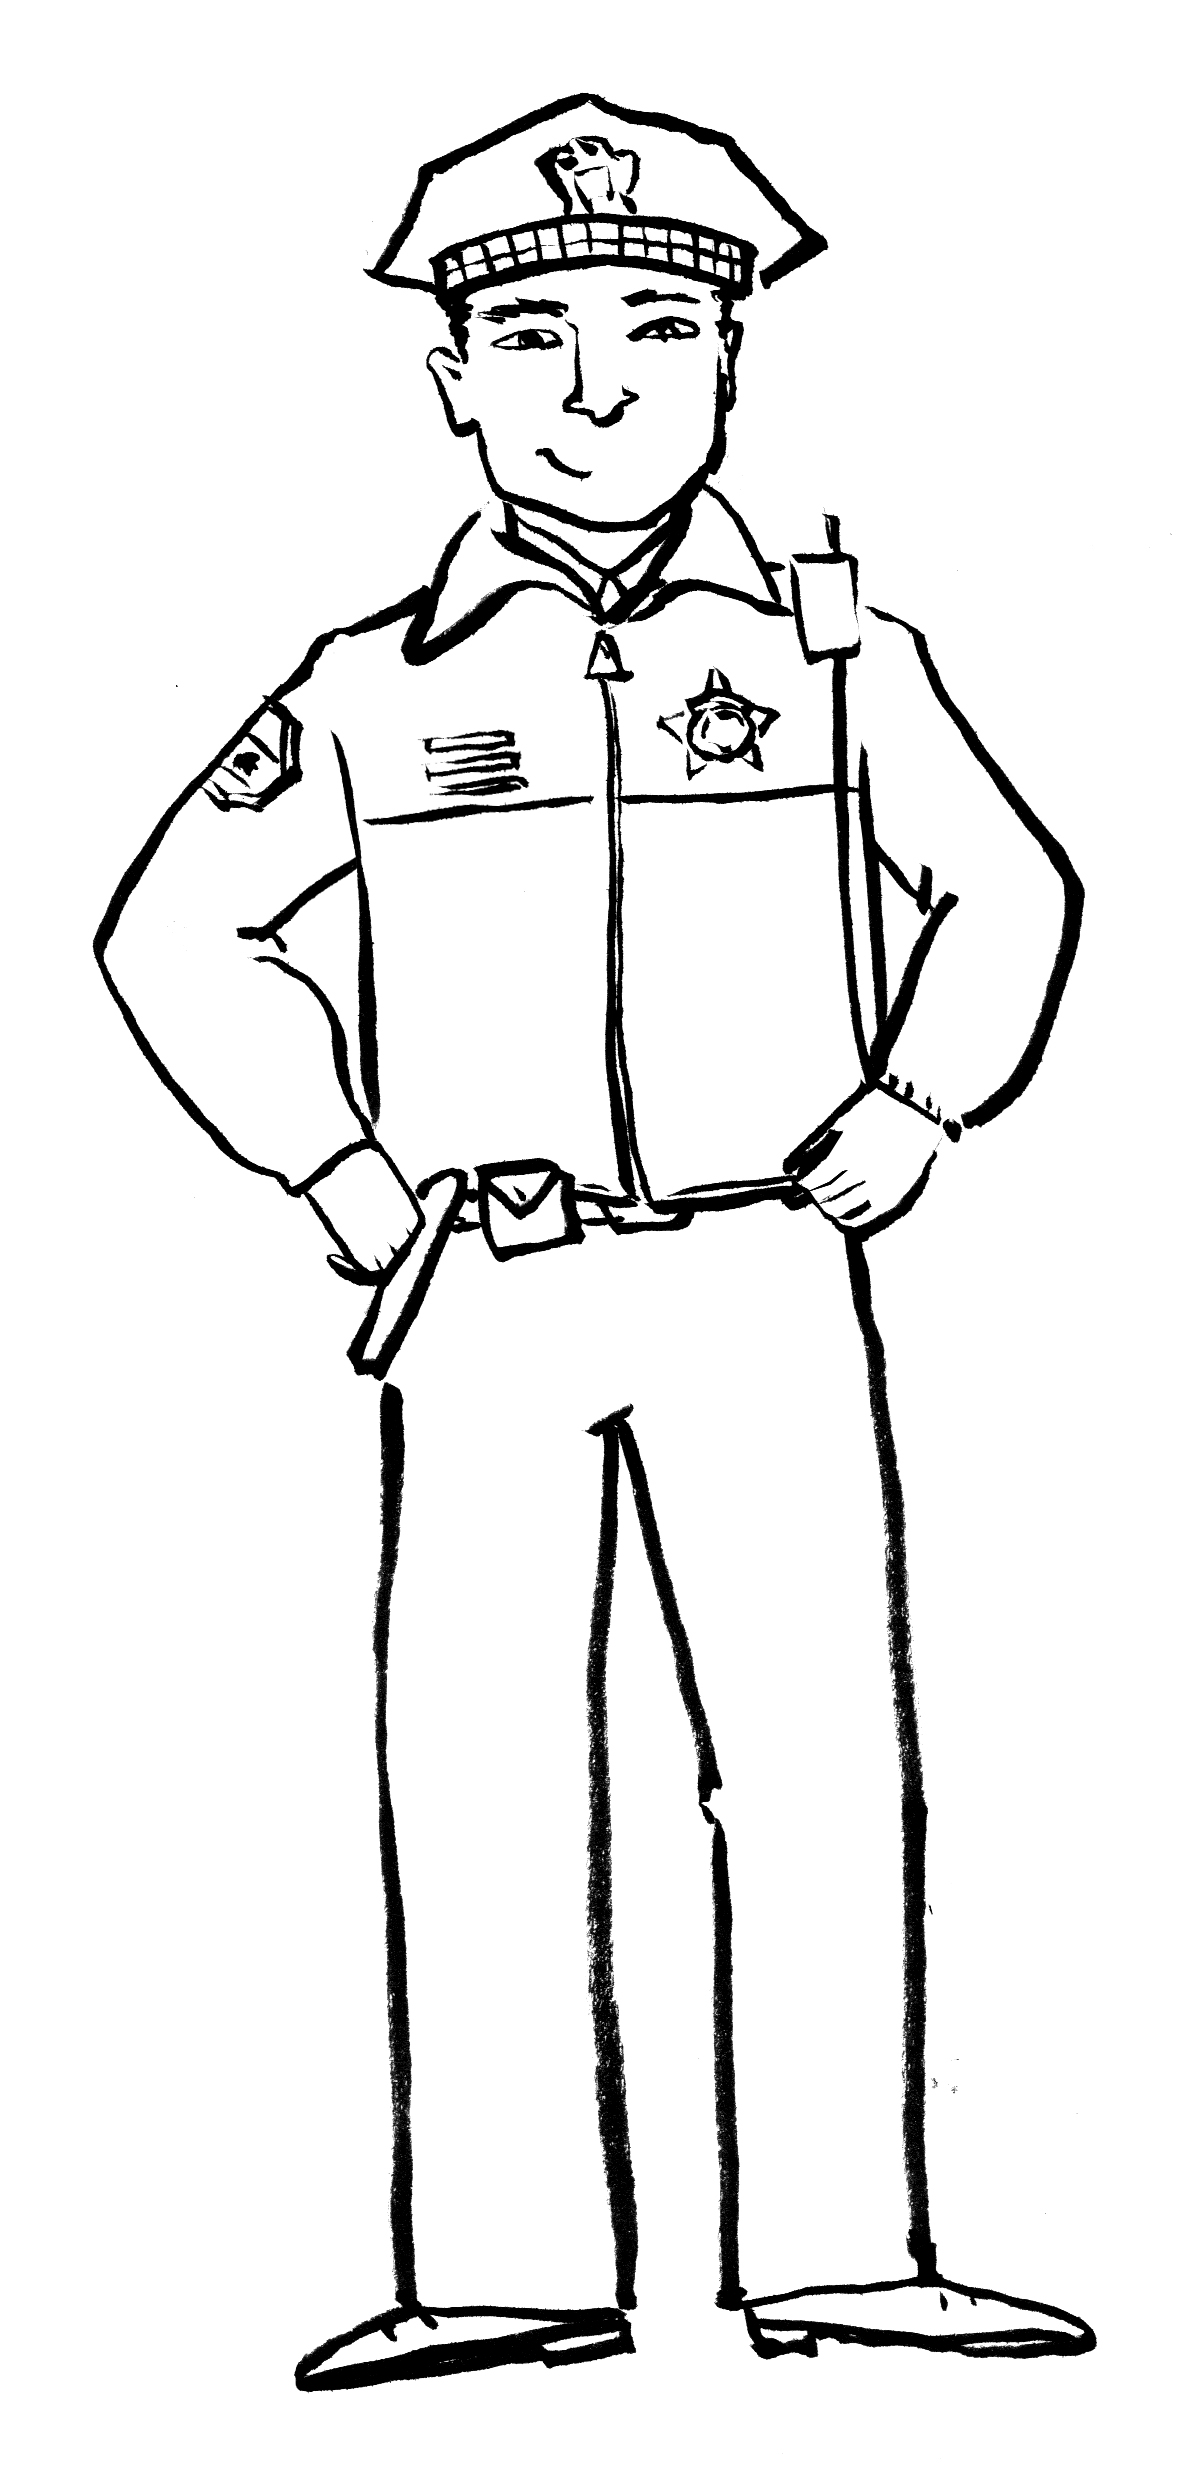 How To Draw A Policeman